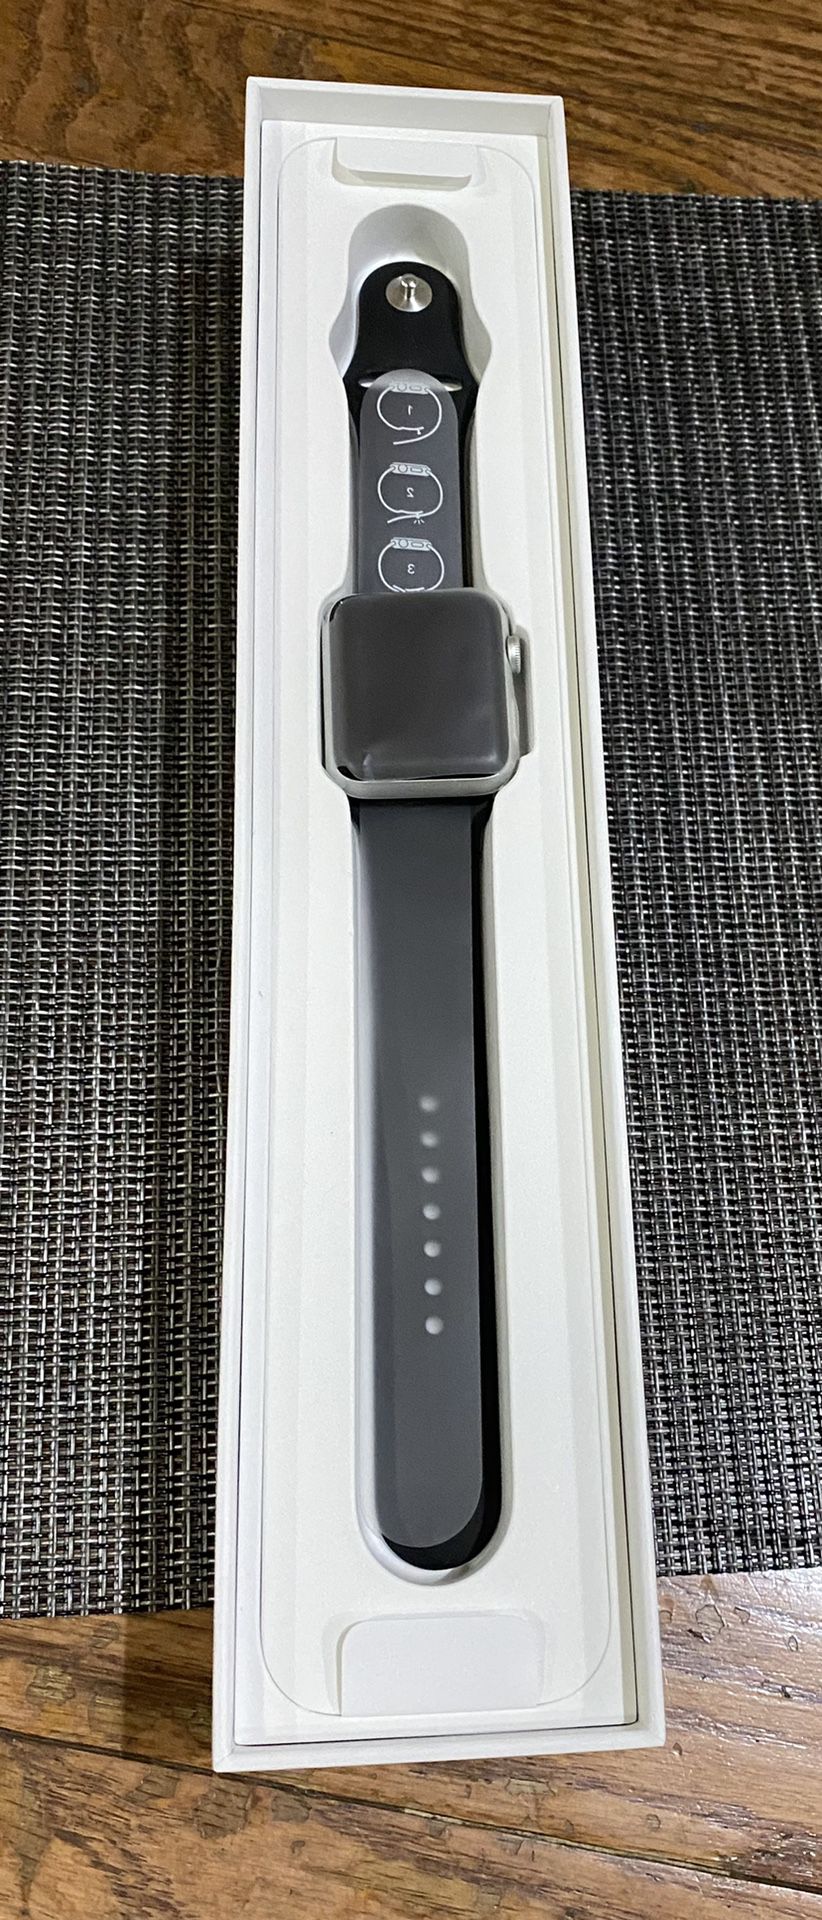 Apple Watch Series 2 with original box and accessories